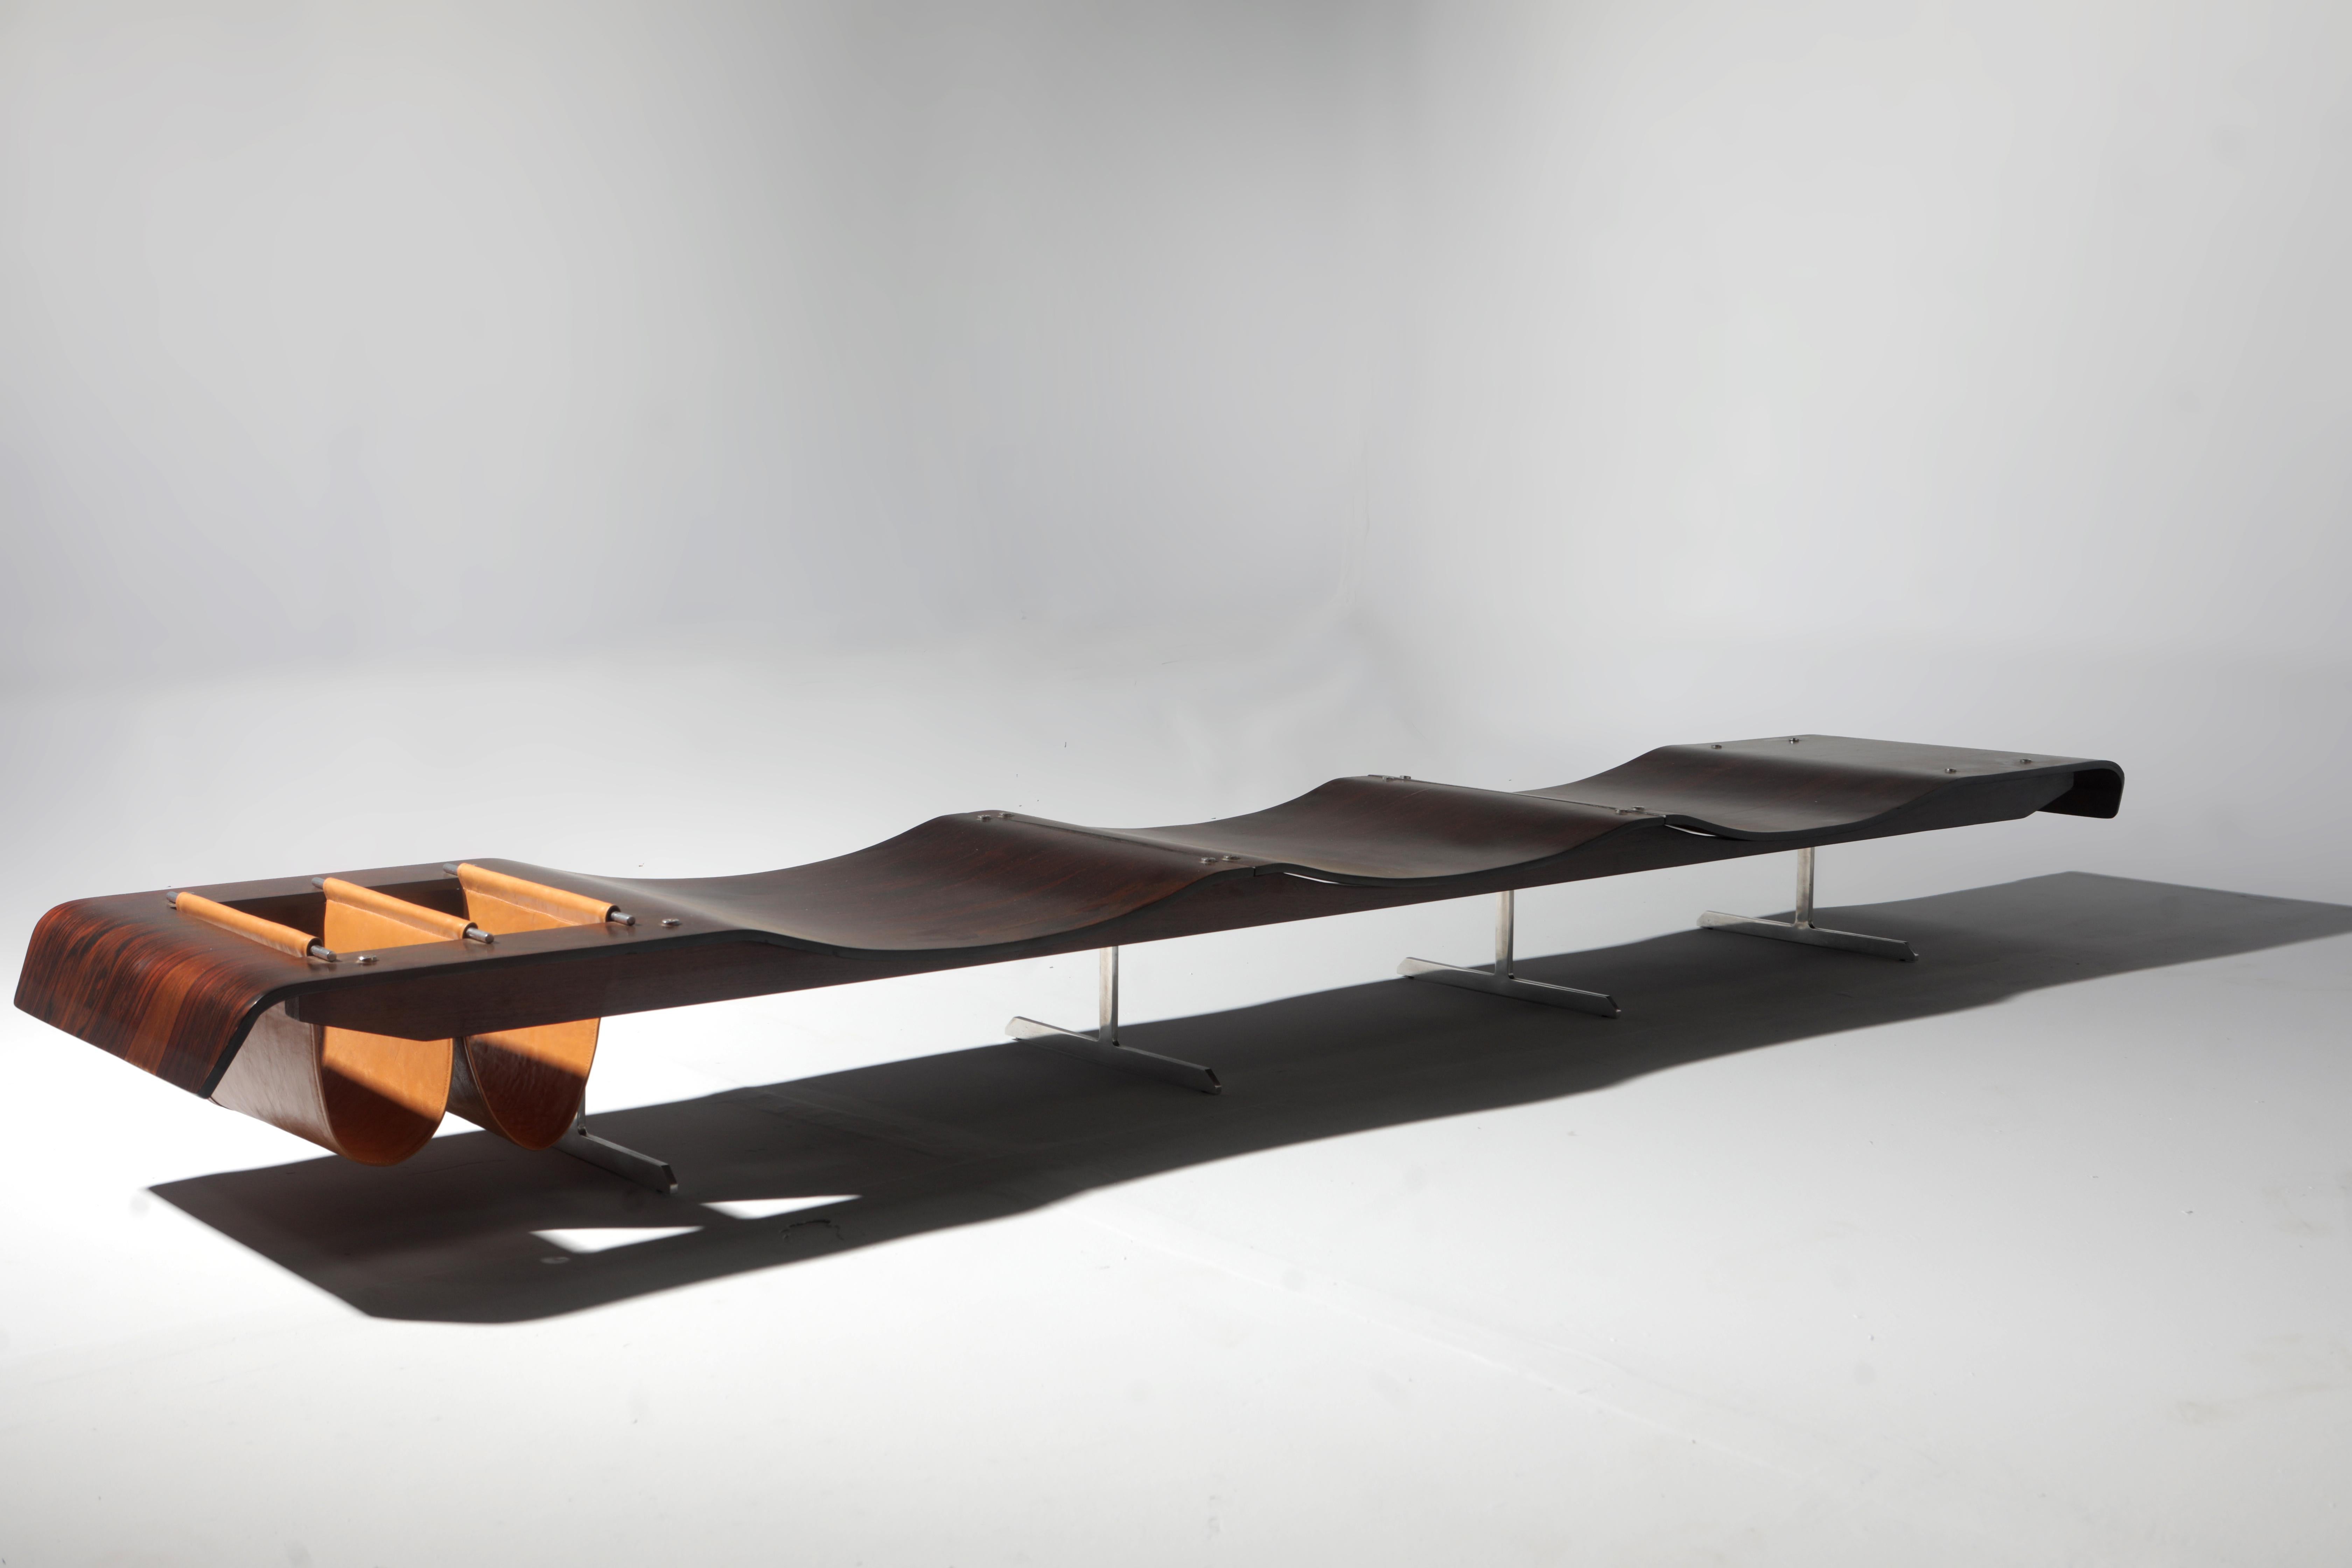 Mid-Century Modern Onda (Wave) bench with magazine holder by Jorge Zalszupin, Brazil, circa 1960s.

Designed by Zalszupin circa 1960s, the Onda bench showcases some of the main characteristics of the designer's work: great technical care in the use